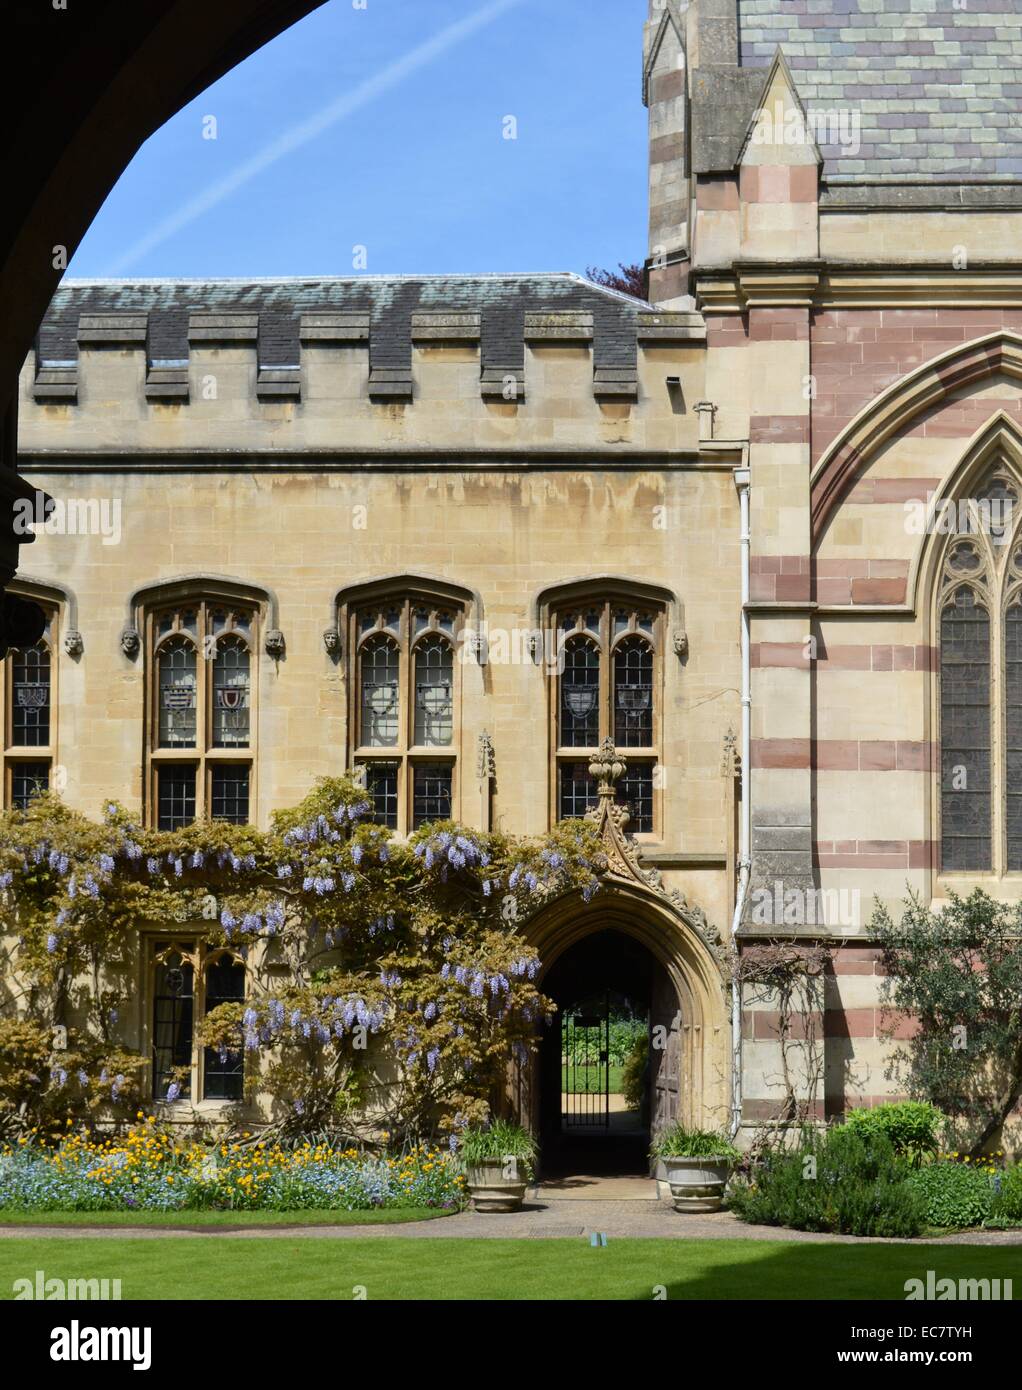 Invitation to Balliol College, one of the odlest colleges in Oxford, dating back to 1263. Stock Photo